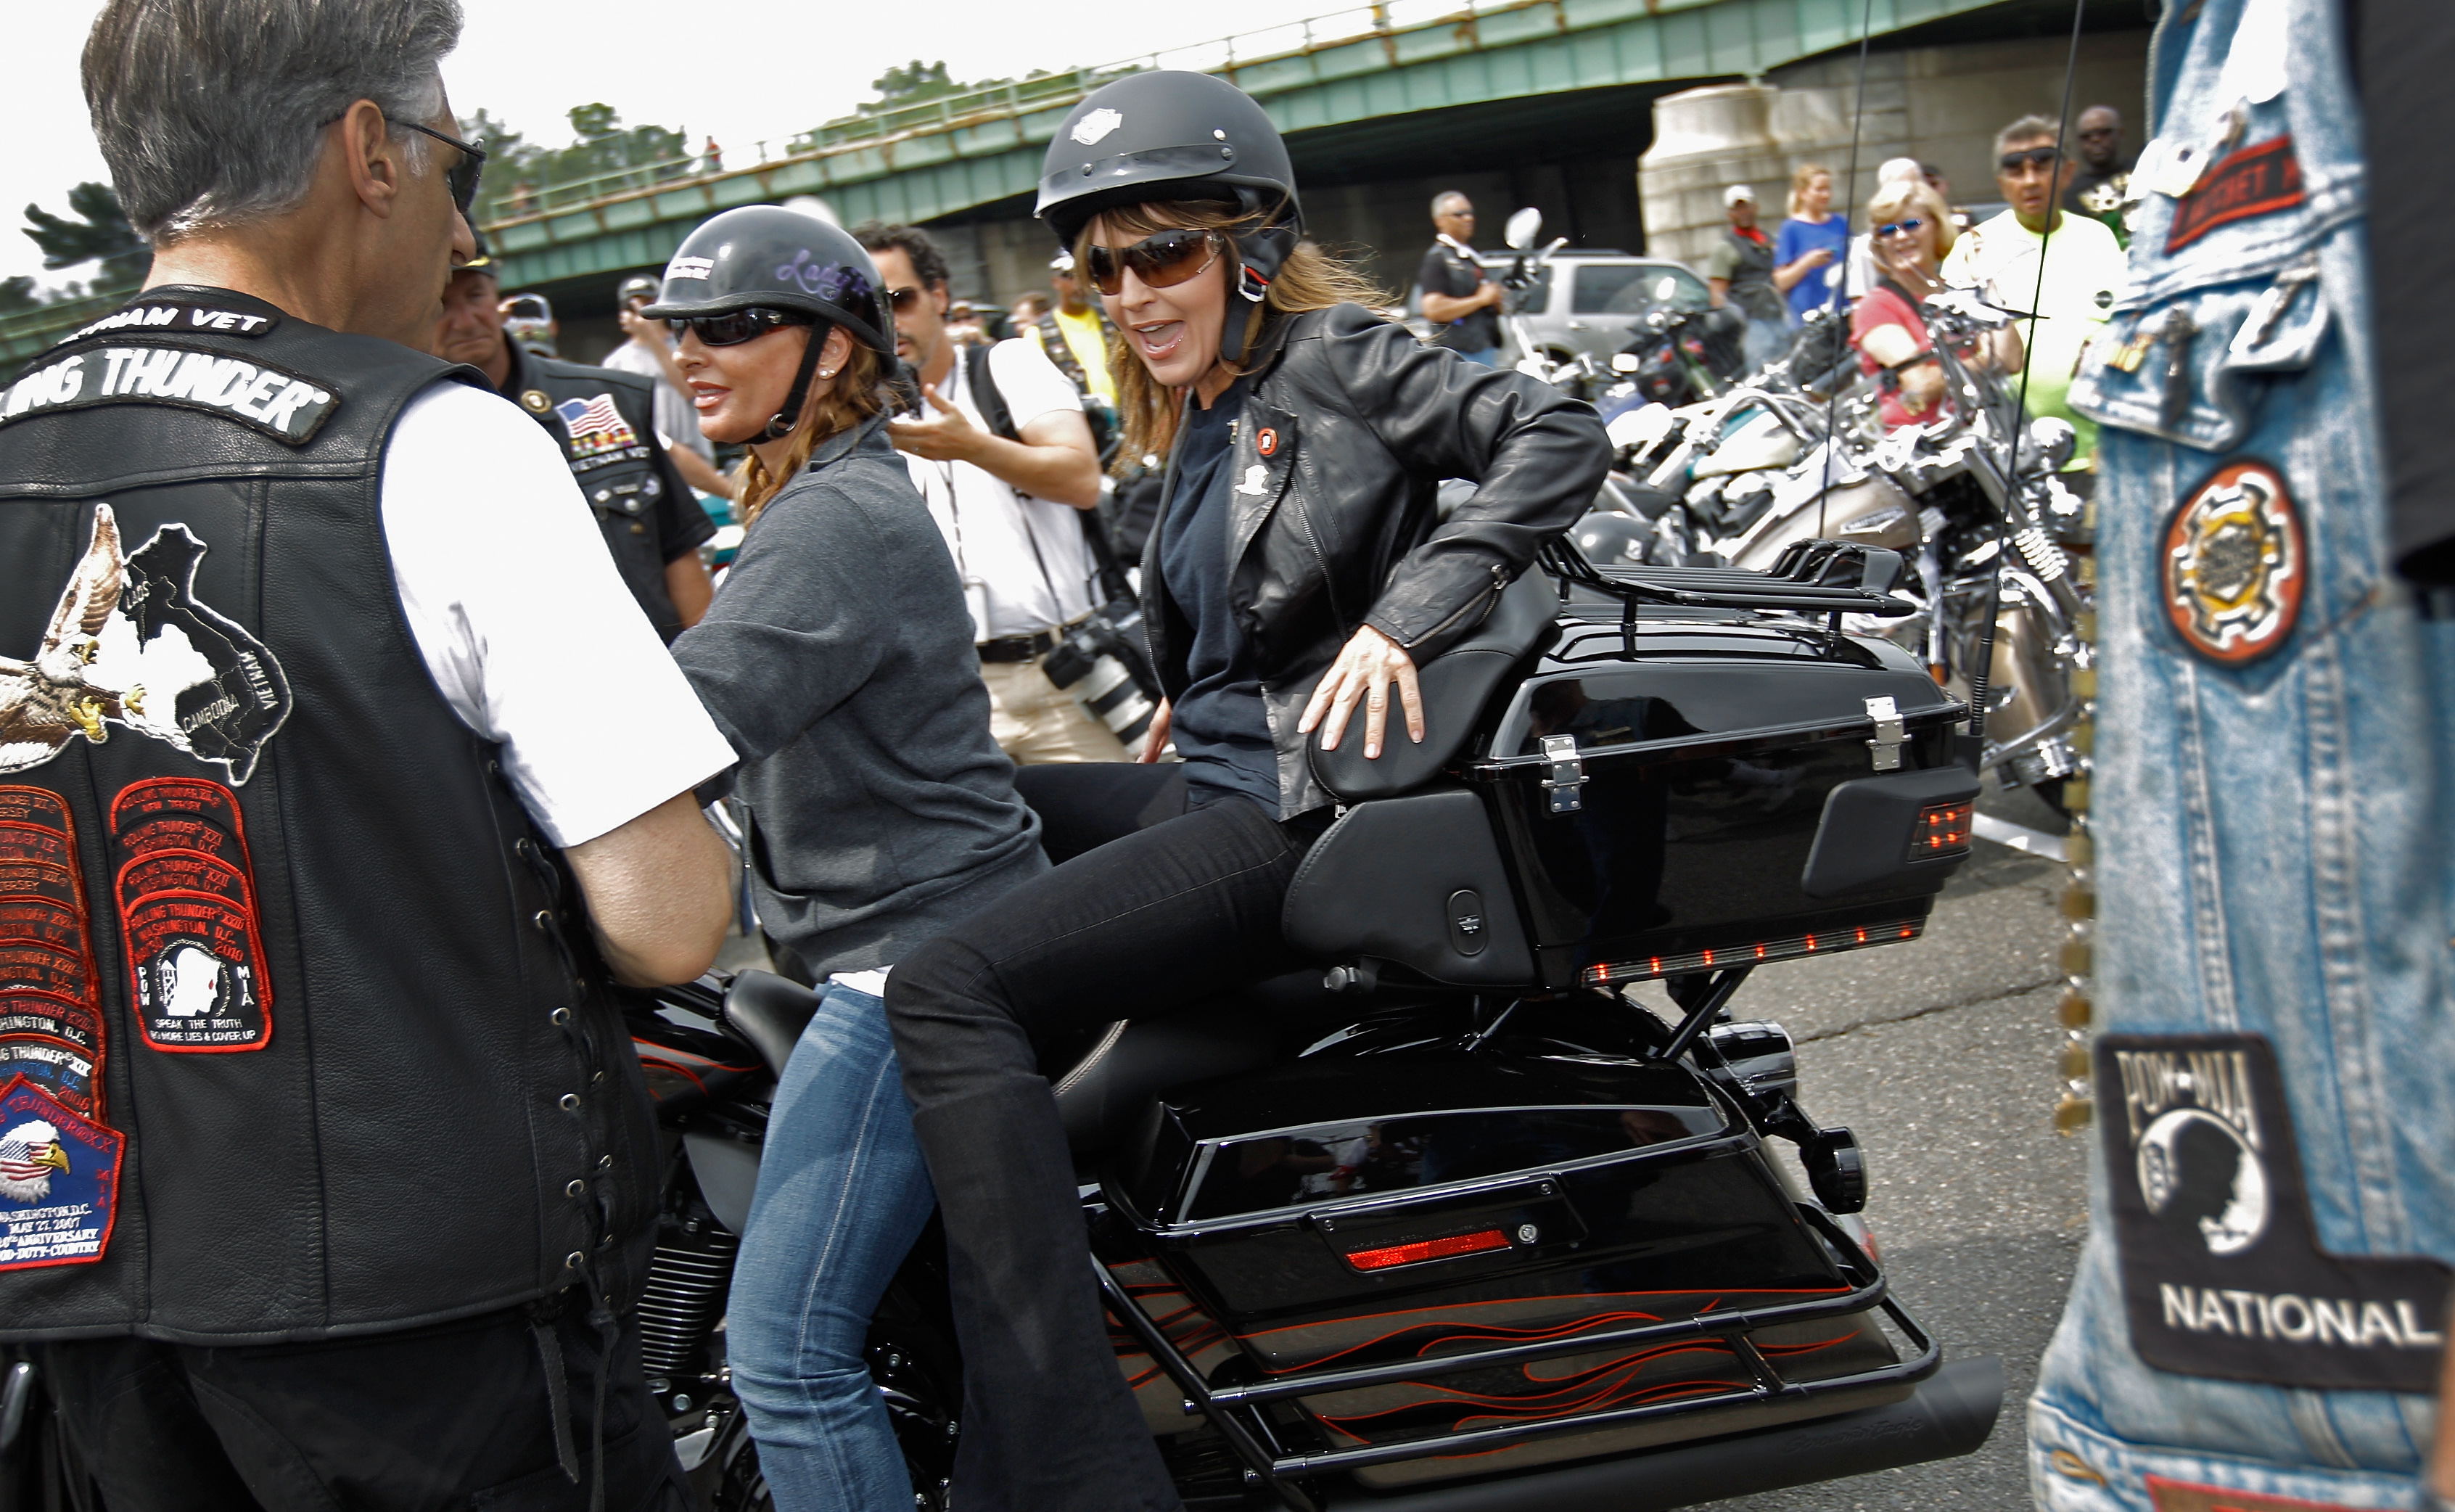 Former U.S. Vice presidential candidate and Alaska Governor Sarah Palin rides on a motorcycle during the  Rolling Thunder  Memorial Day weekend parade May 29, 2011 in Arlington, Virginia.